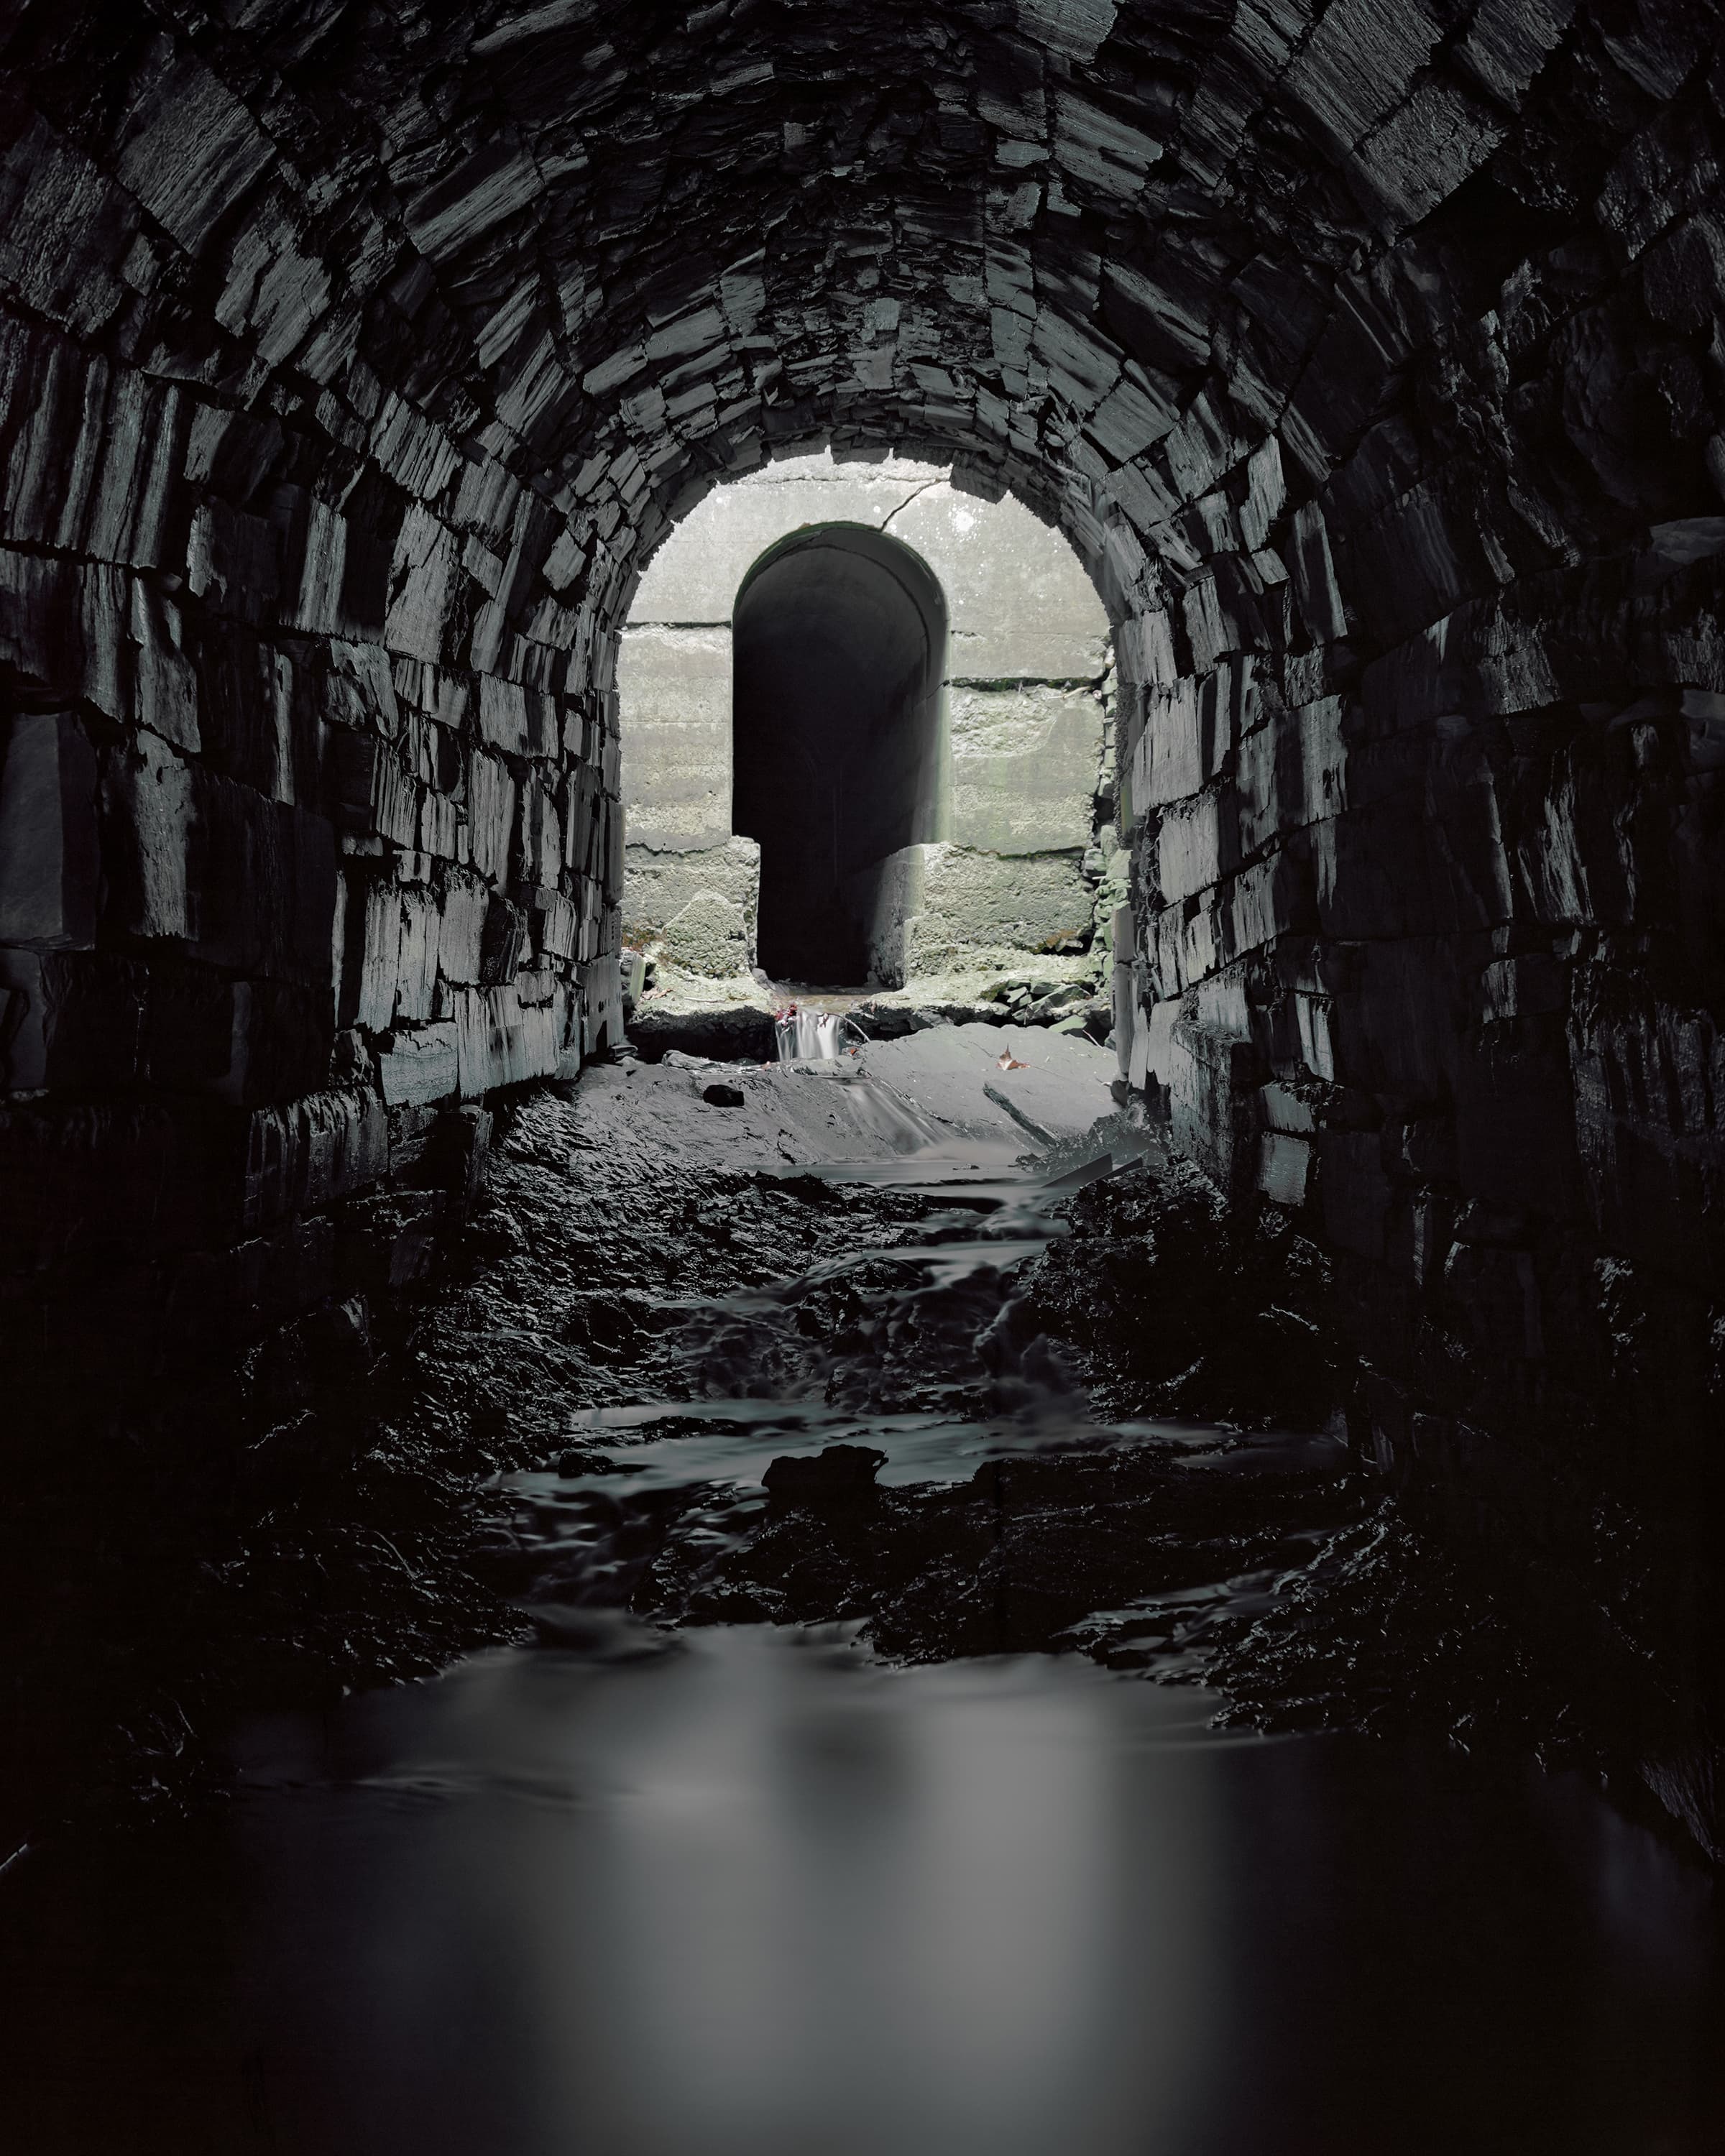 A stream runs through a dark tunnel lined with irregular stones, at the end is a shaft of light and second tunnel cast in concrete, shaped like a keyhole.